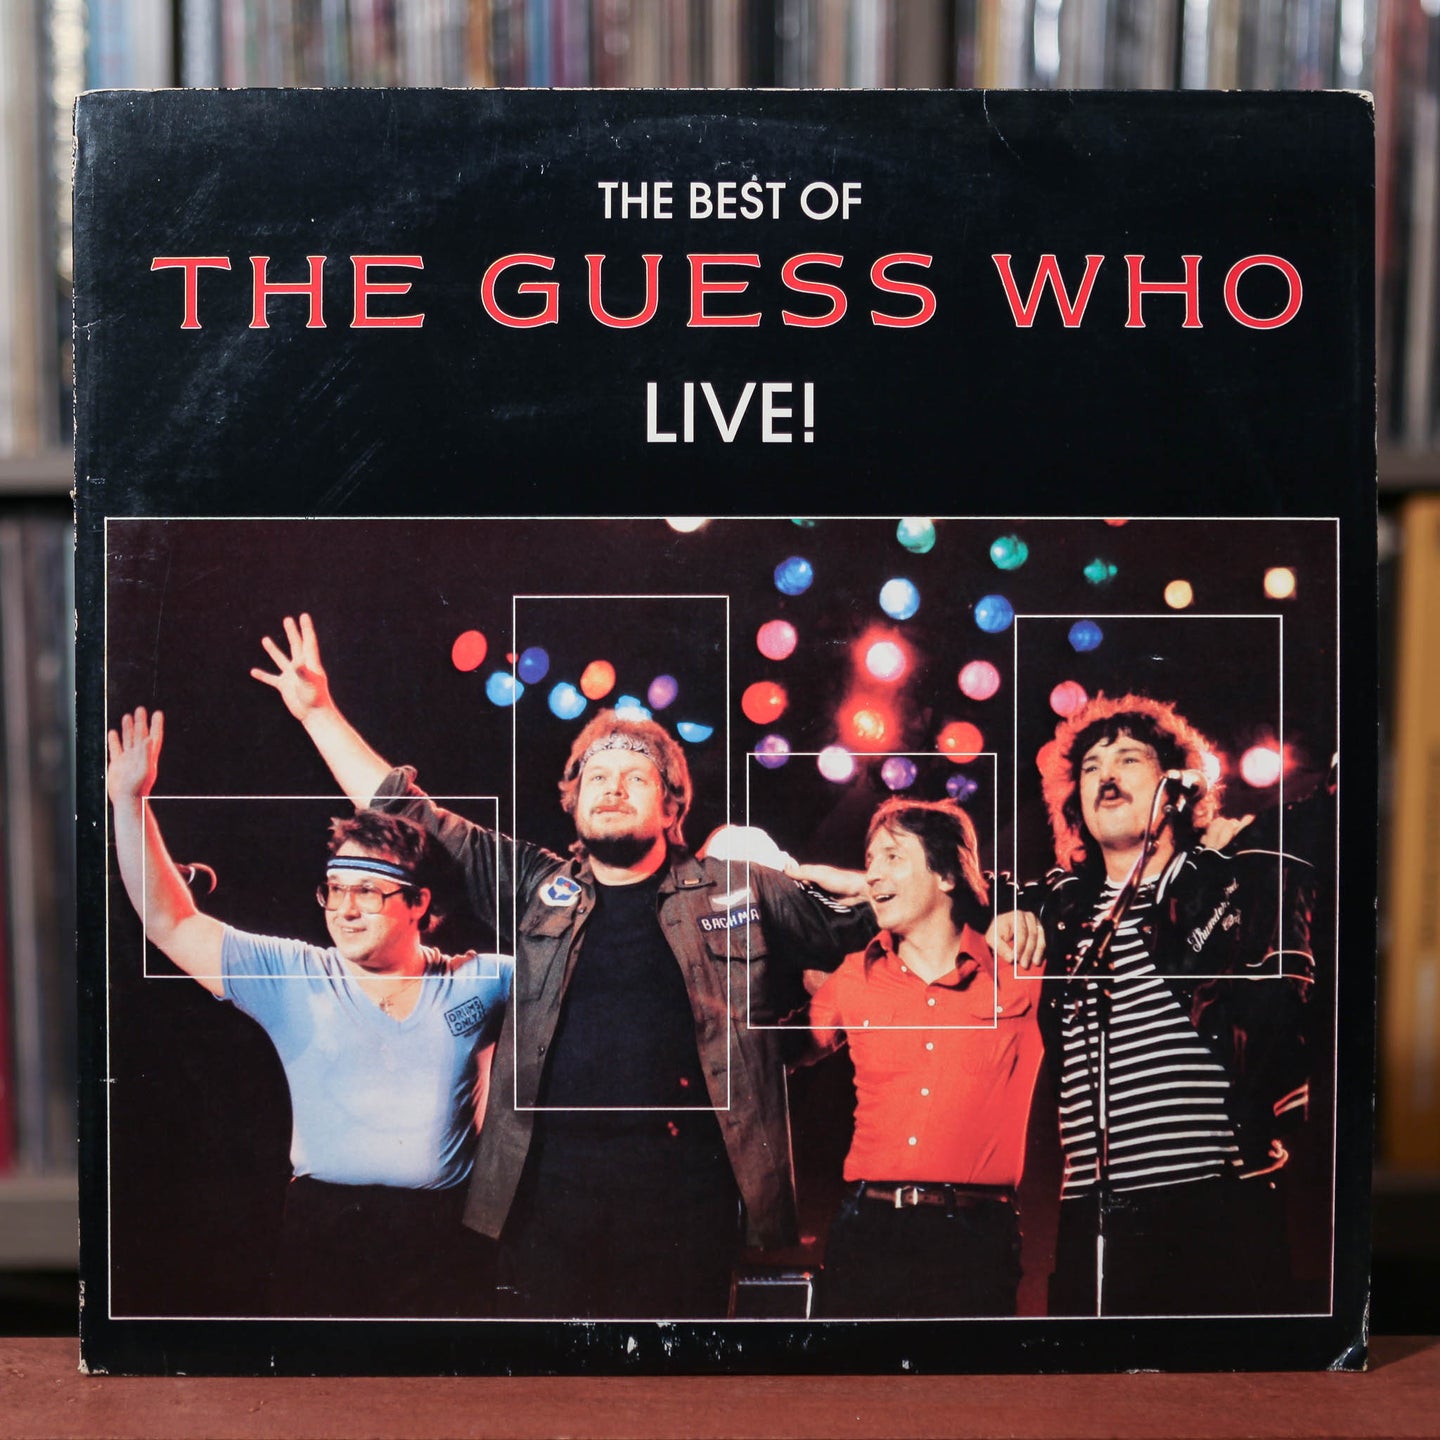 The Guess Who - The Best Of The Guess Who Live! - 2LP - 1986 Compleat Records, VG+/EX